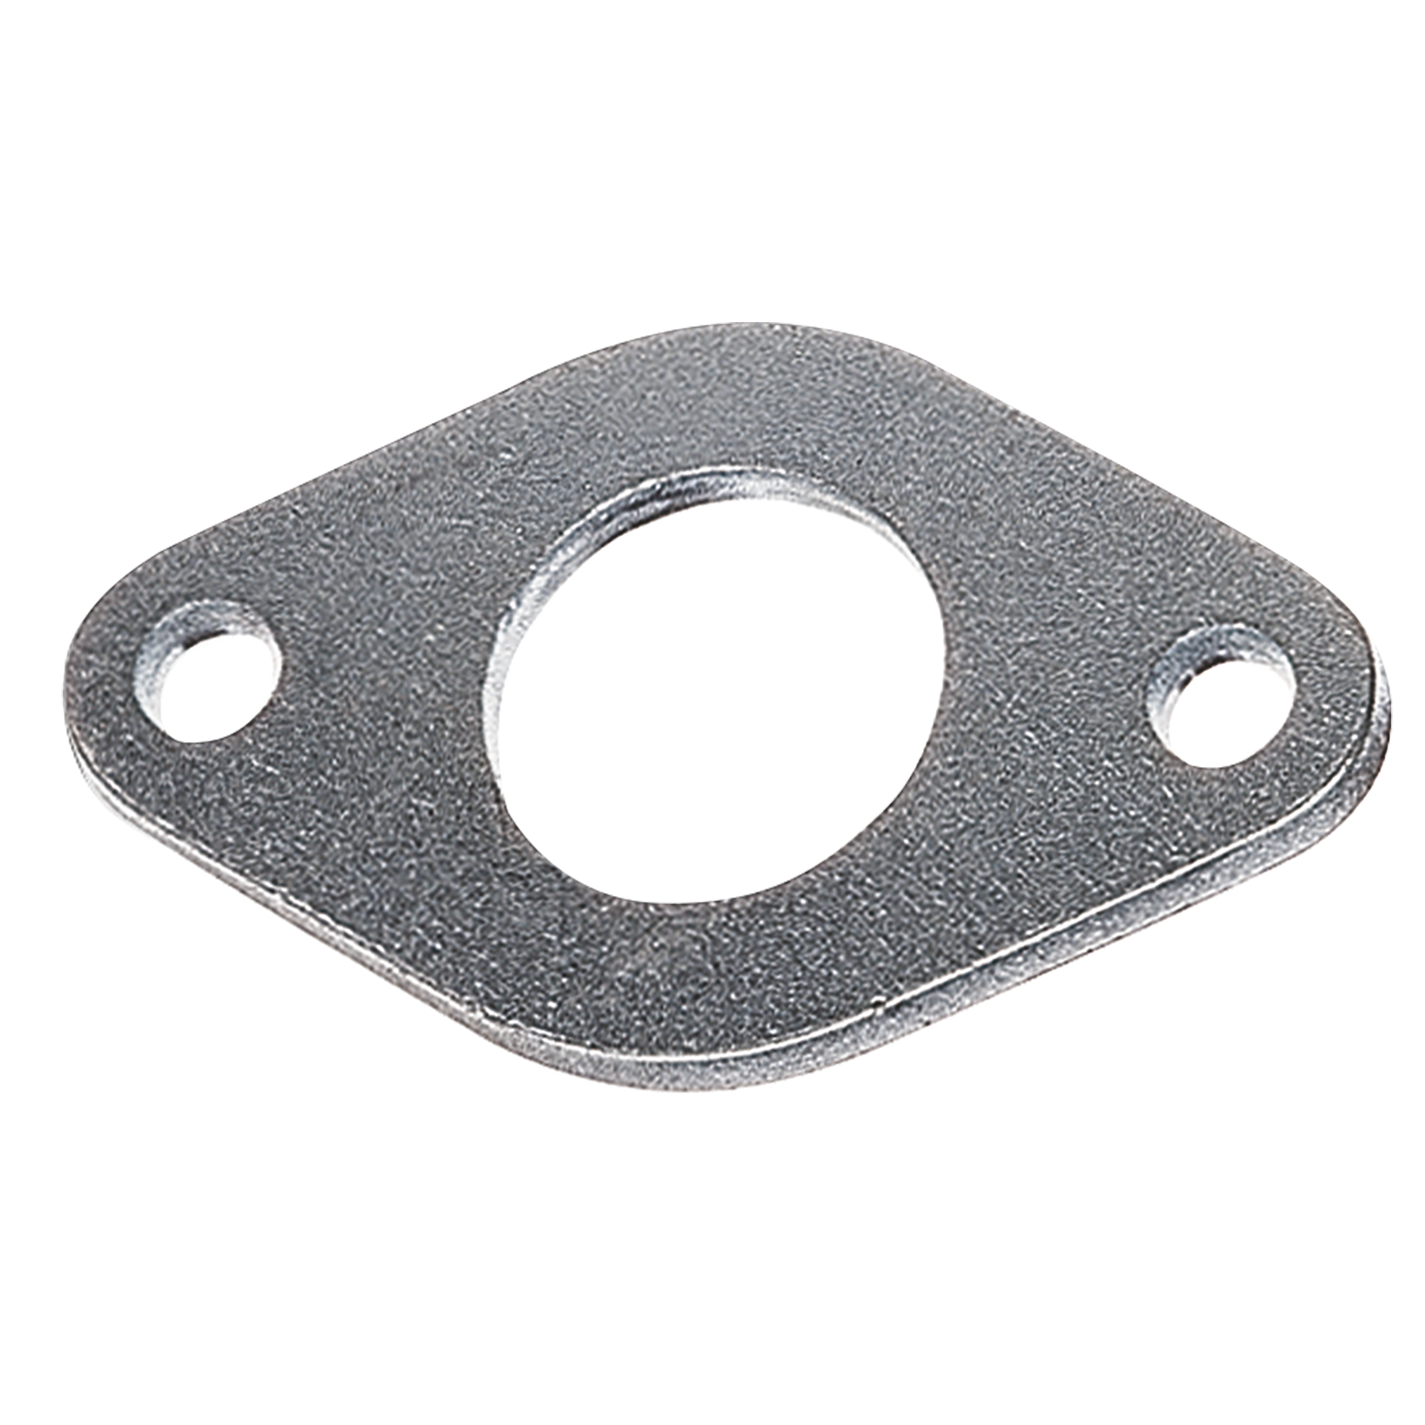 FRONT AND REAR FLANGE MOUNTS FOR 125MM CYL